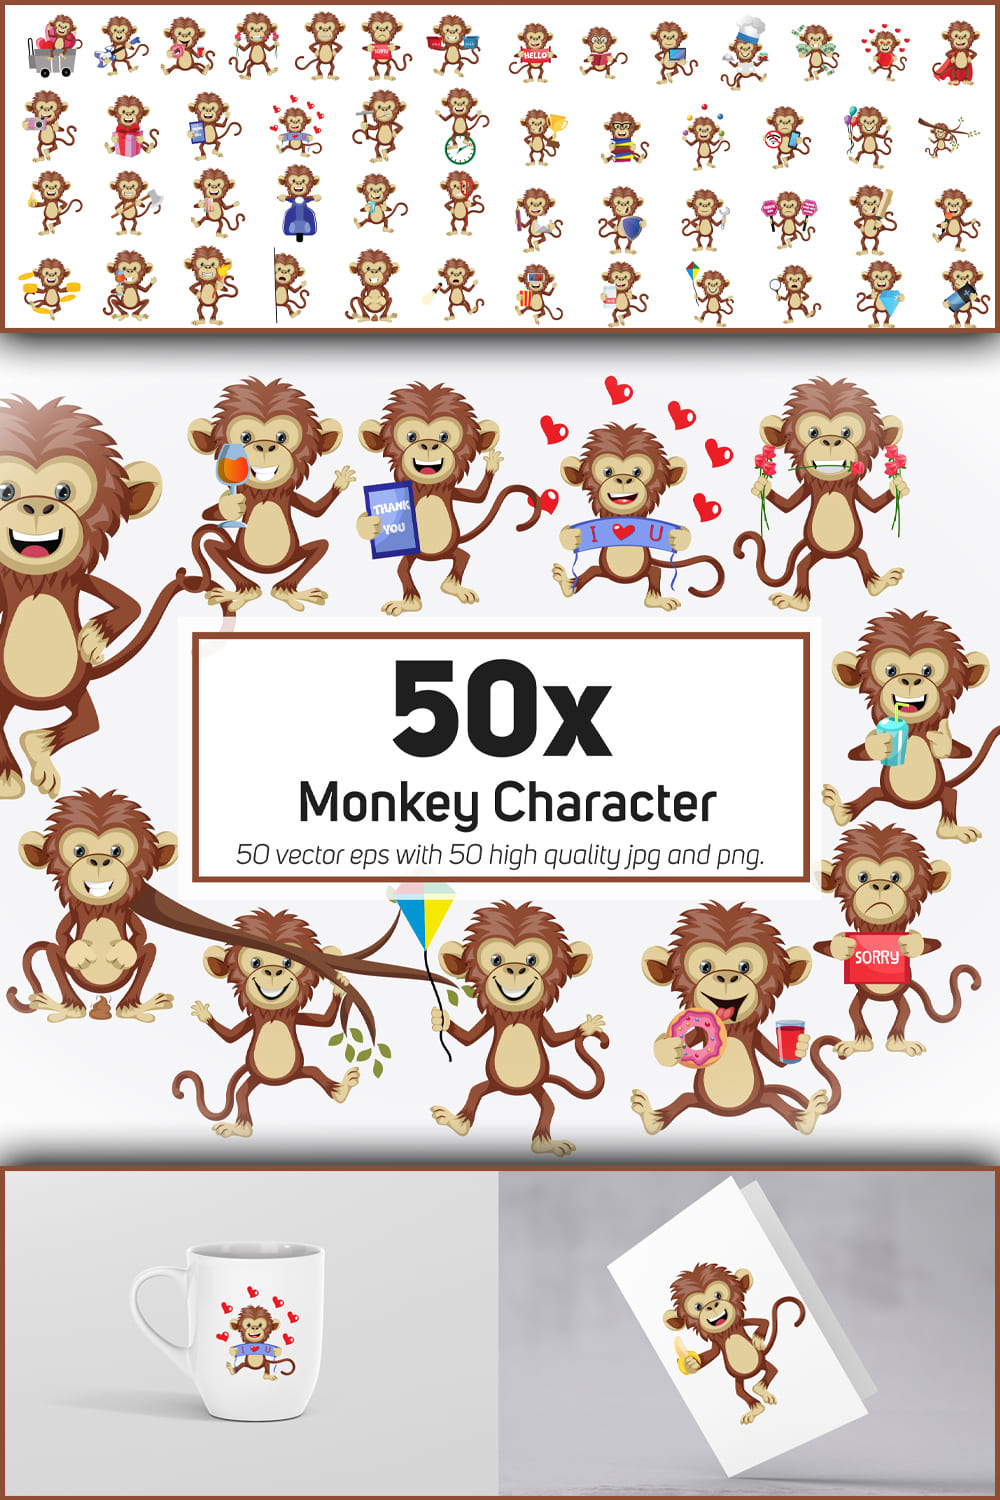 544097 50x monkey character or mascot collection illustra pinterest 1000 1500 965